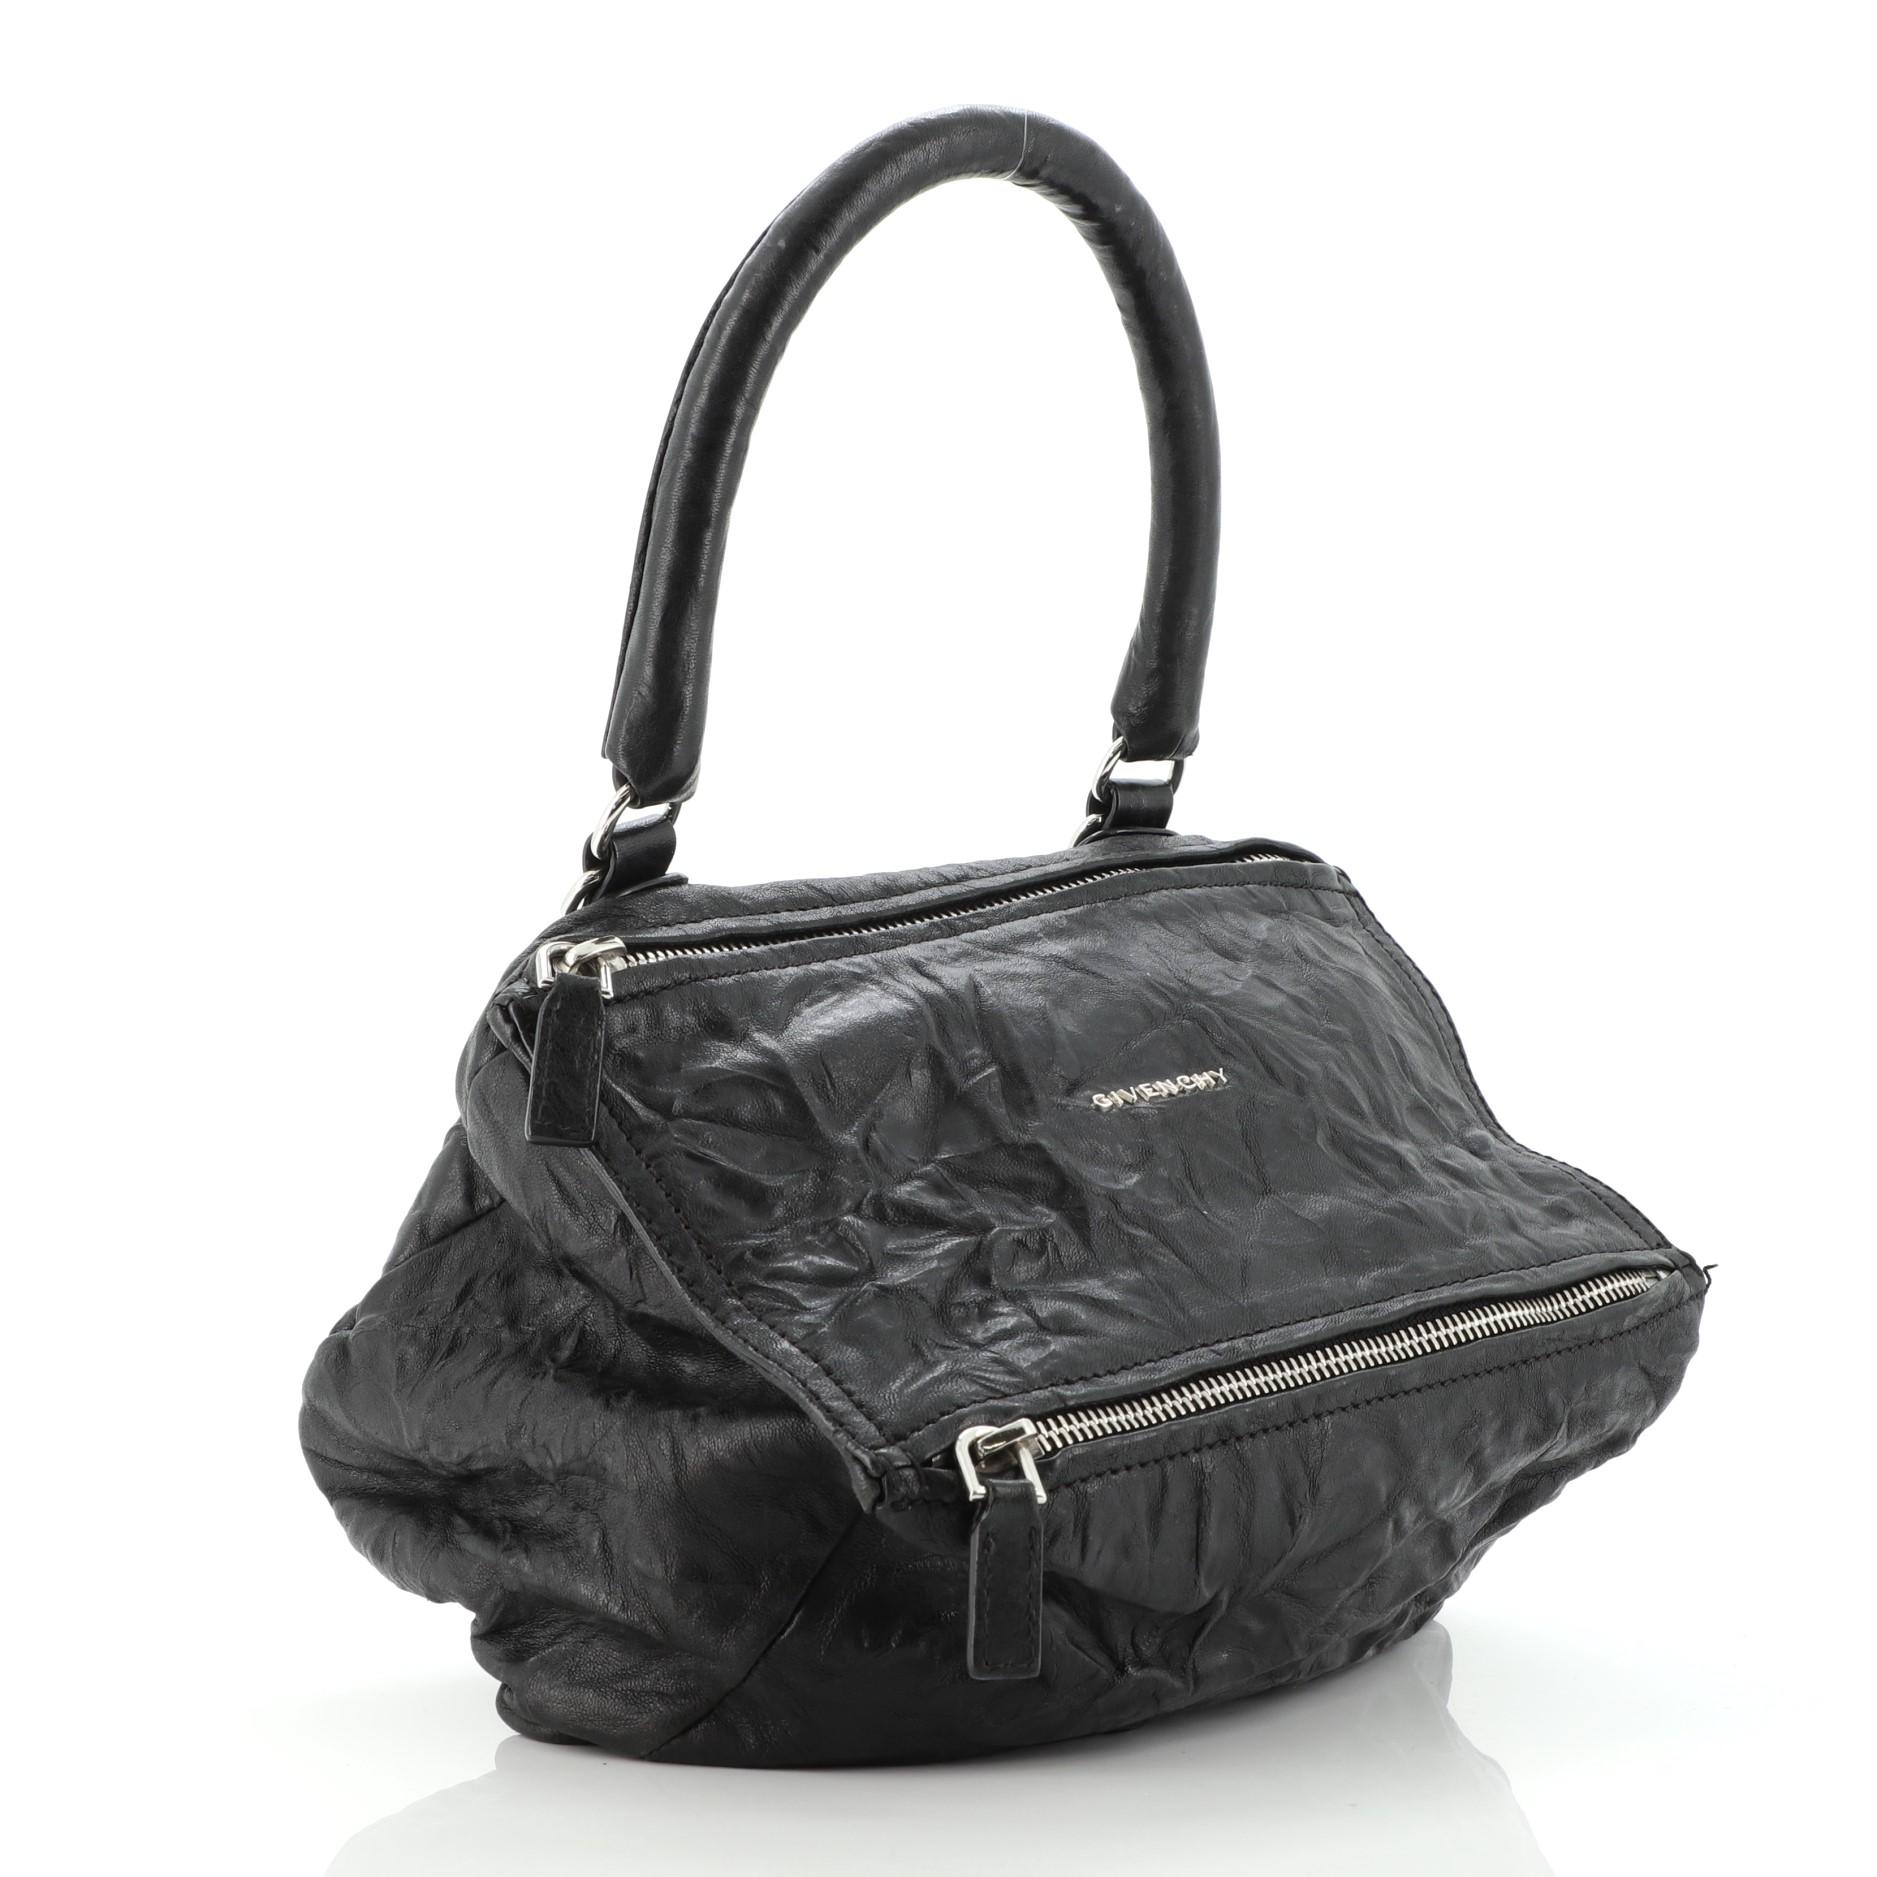 Black Givenchy Pandora Bag Distressed Leather Small